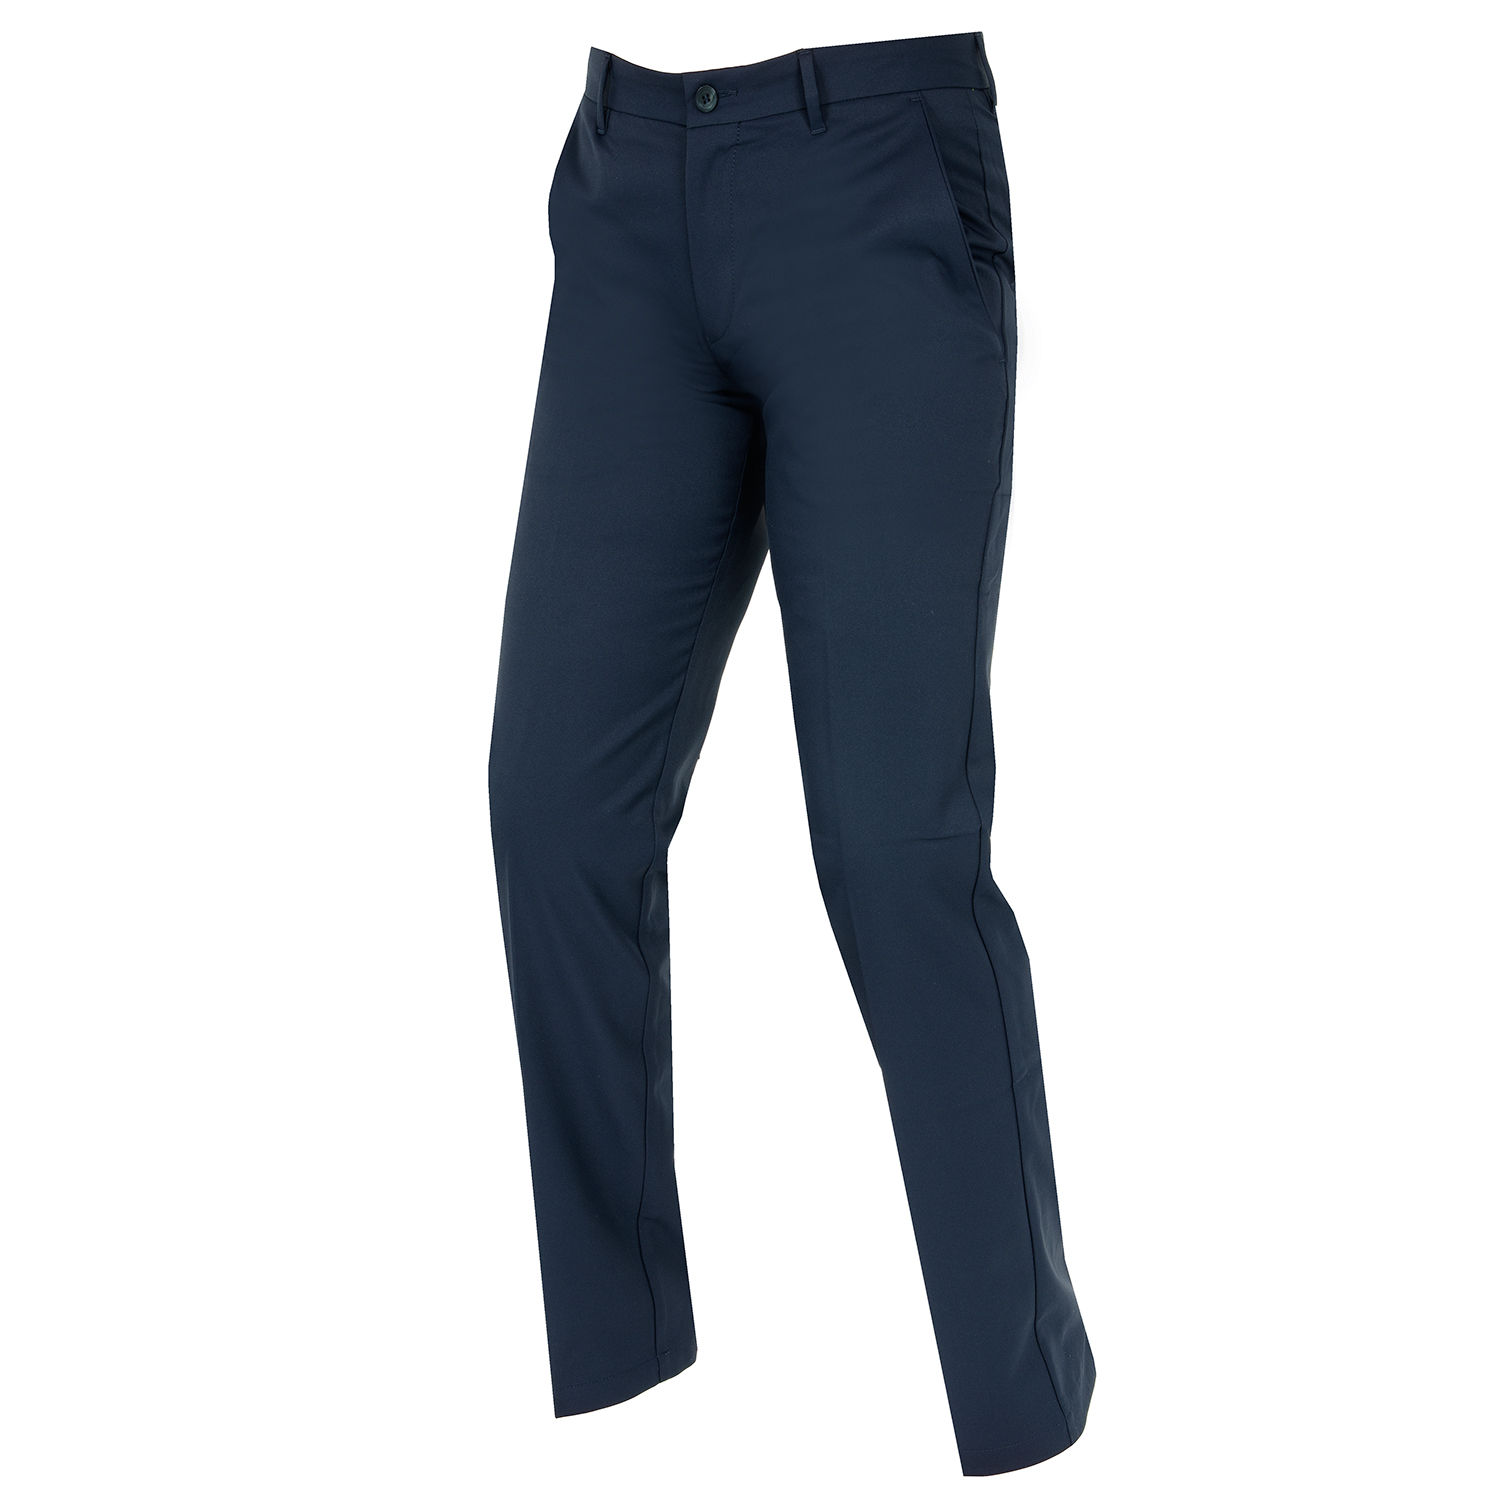 BOSS ATHLEISURE Hapron Trousers Navy SP18 | Scottsdale Golf